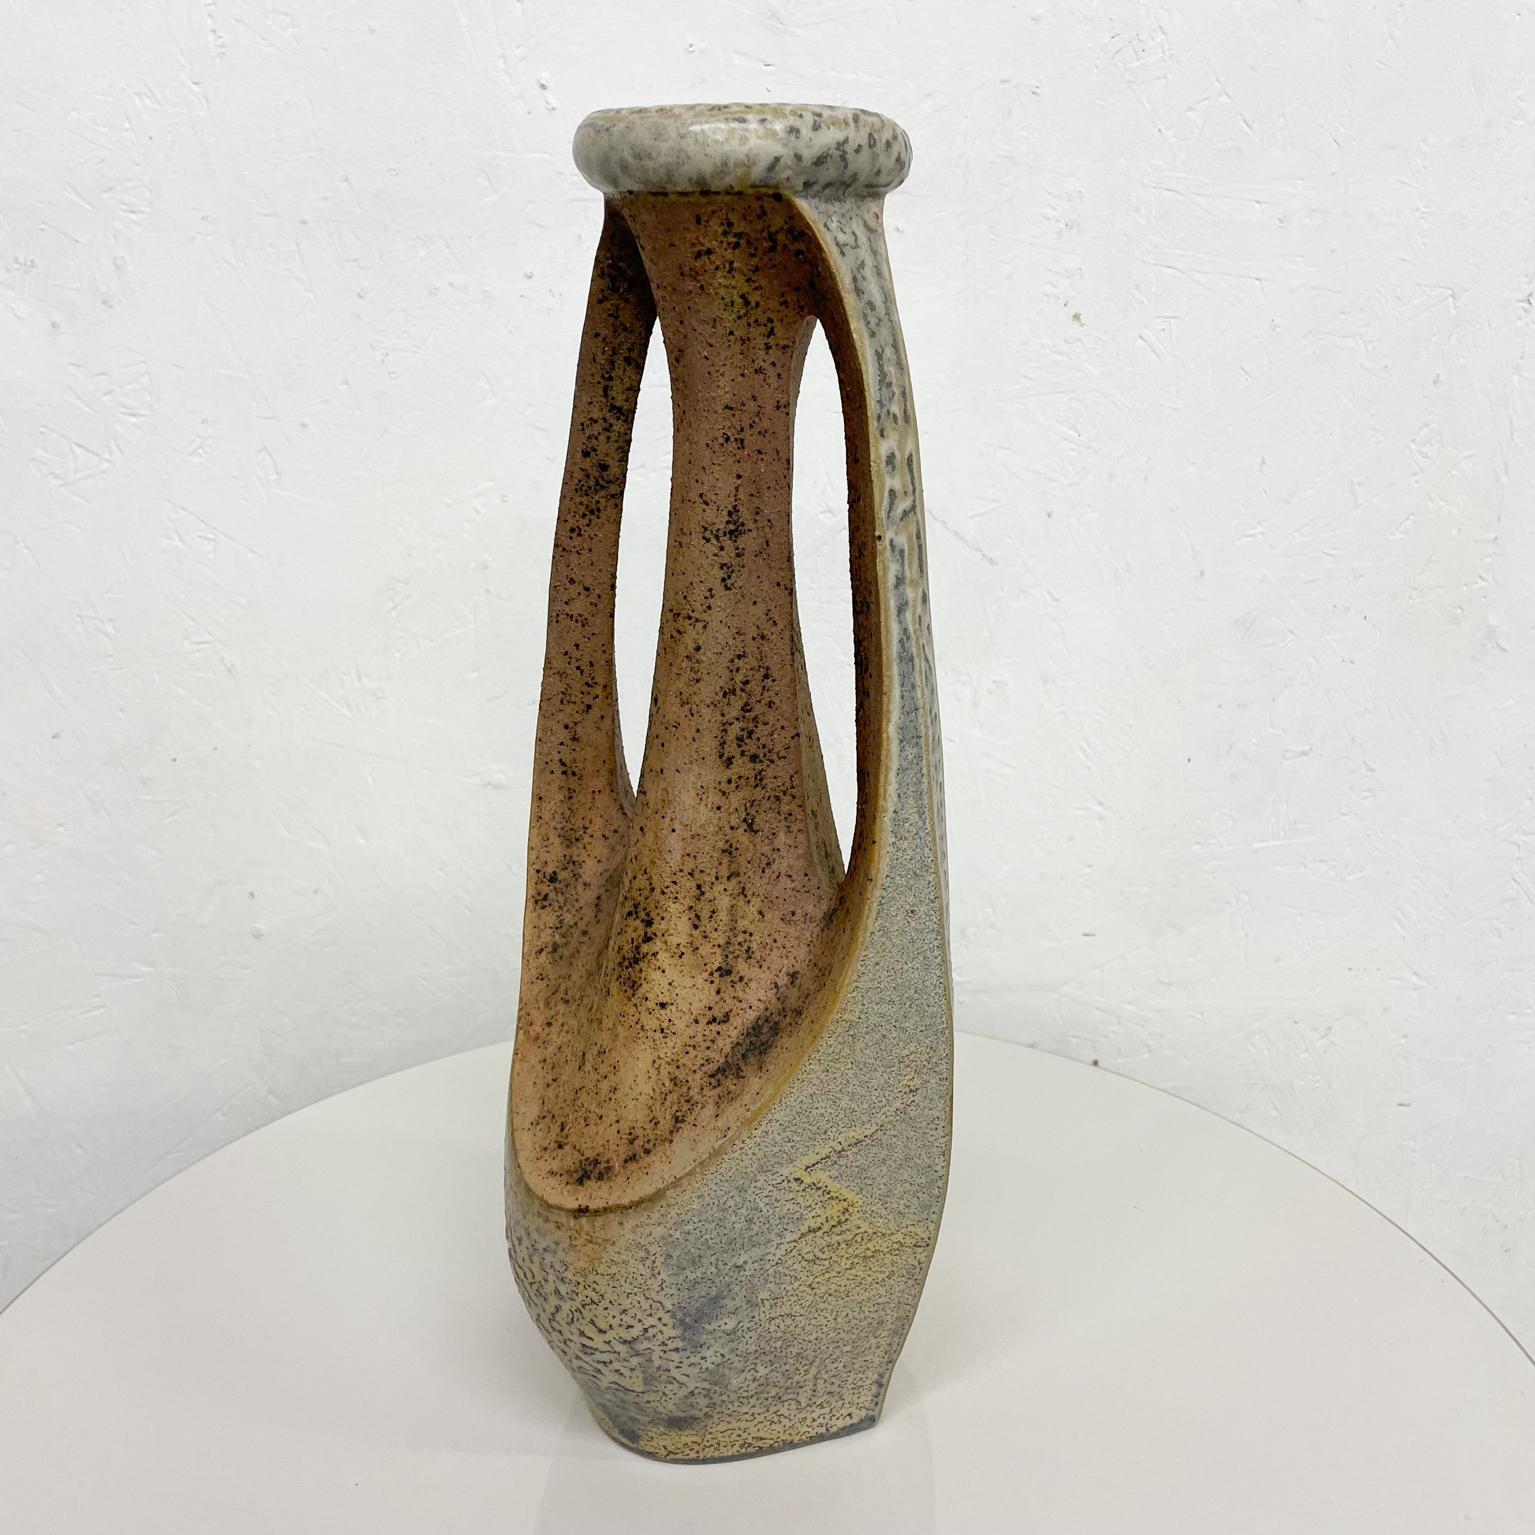 Speckled Pottery Sculptural Modernist Vase by Chico Ribeiro Munoz Brazil For Sale 1